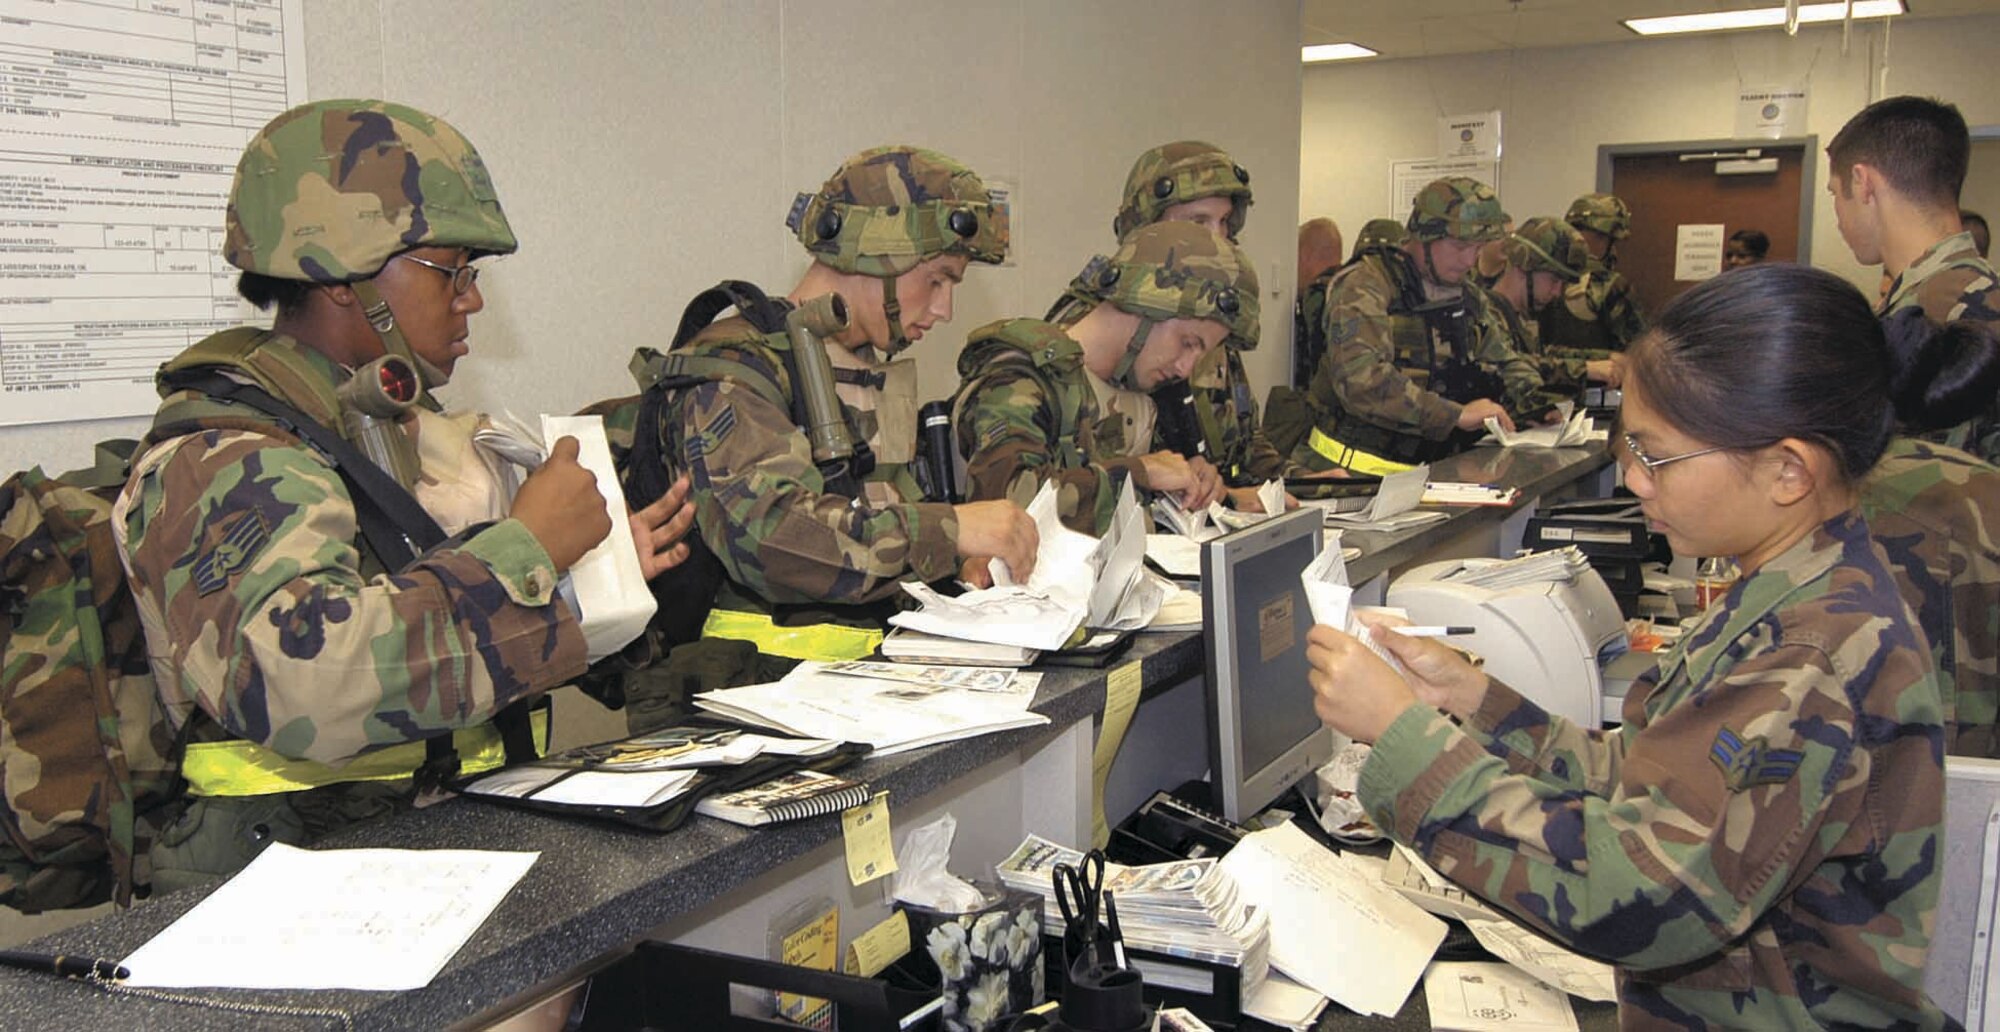 Team Tinker members simulate how they would file through an Operation Readiness Inspection Deployment Processing Line during the ORI Exercise in 2006. (Air Force photo)